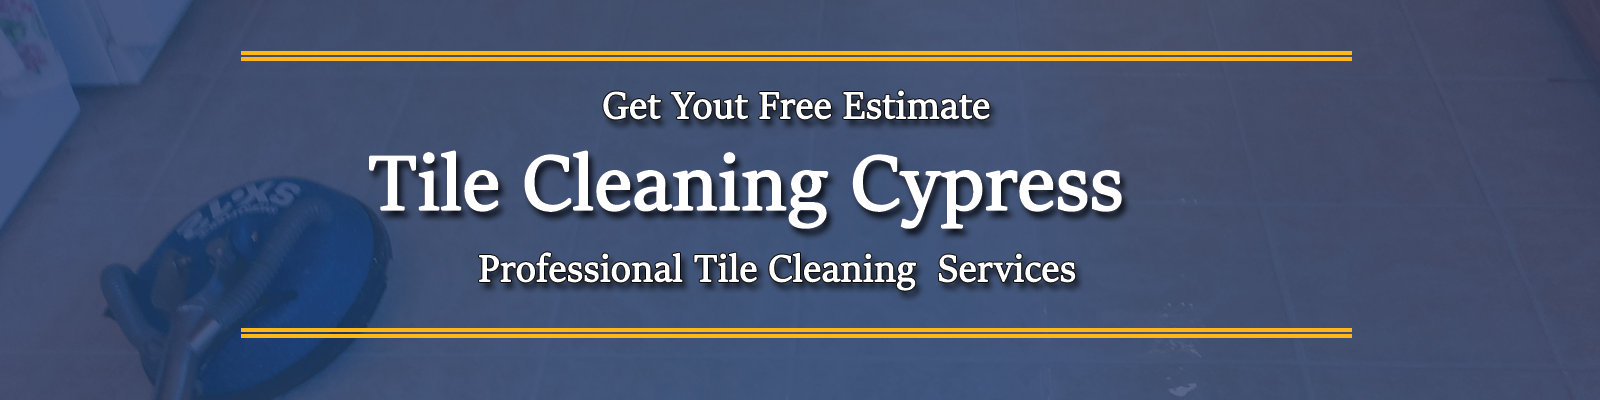 Cypress cleaning service